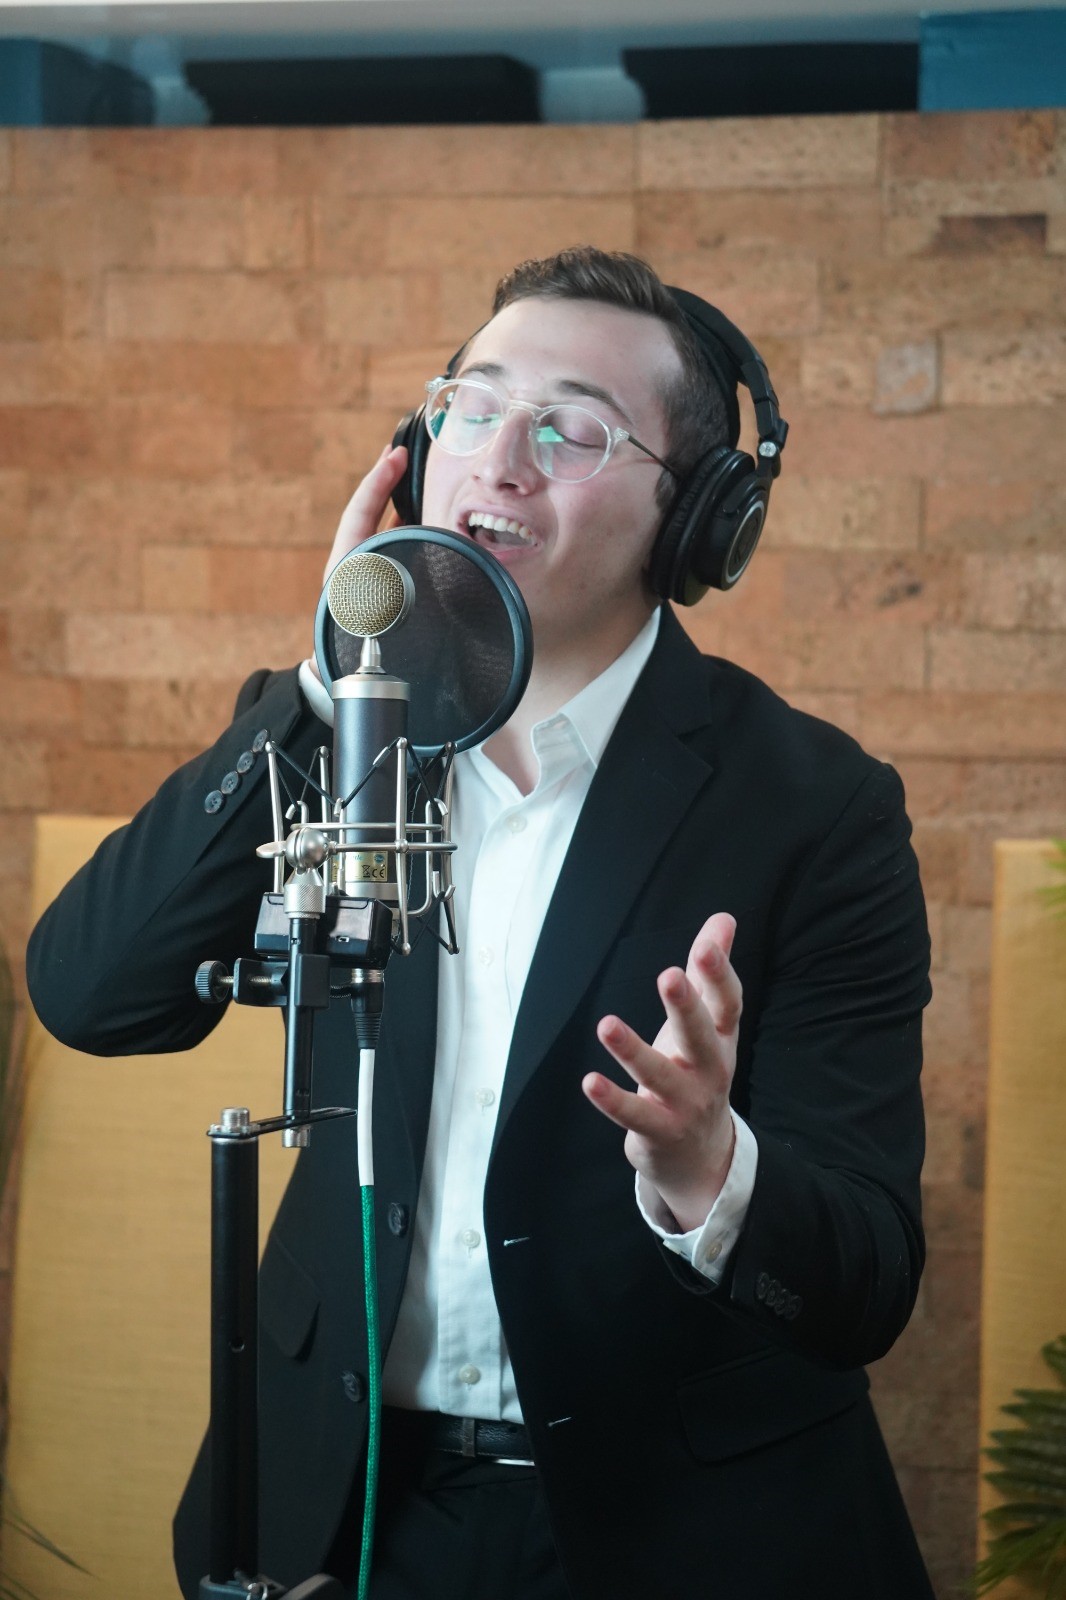 Dovid Pearlman singing into a mic, with headphones, while recording his album